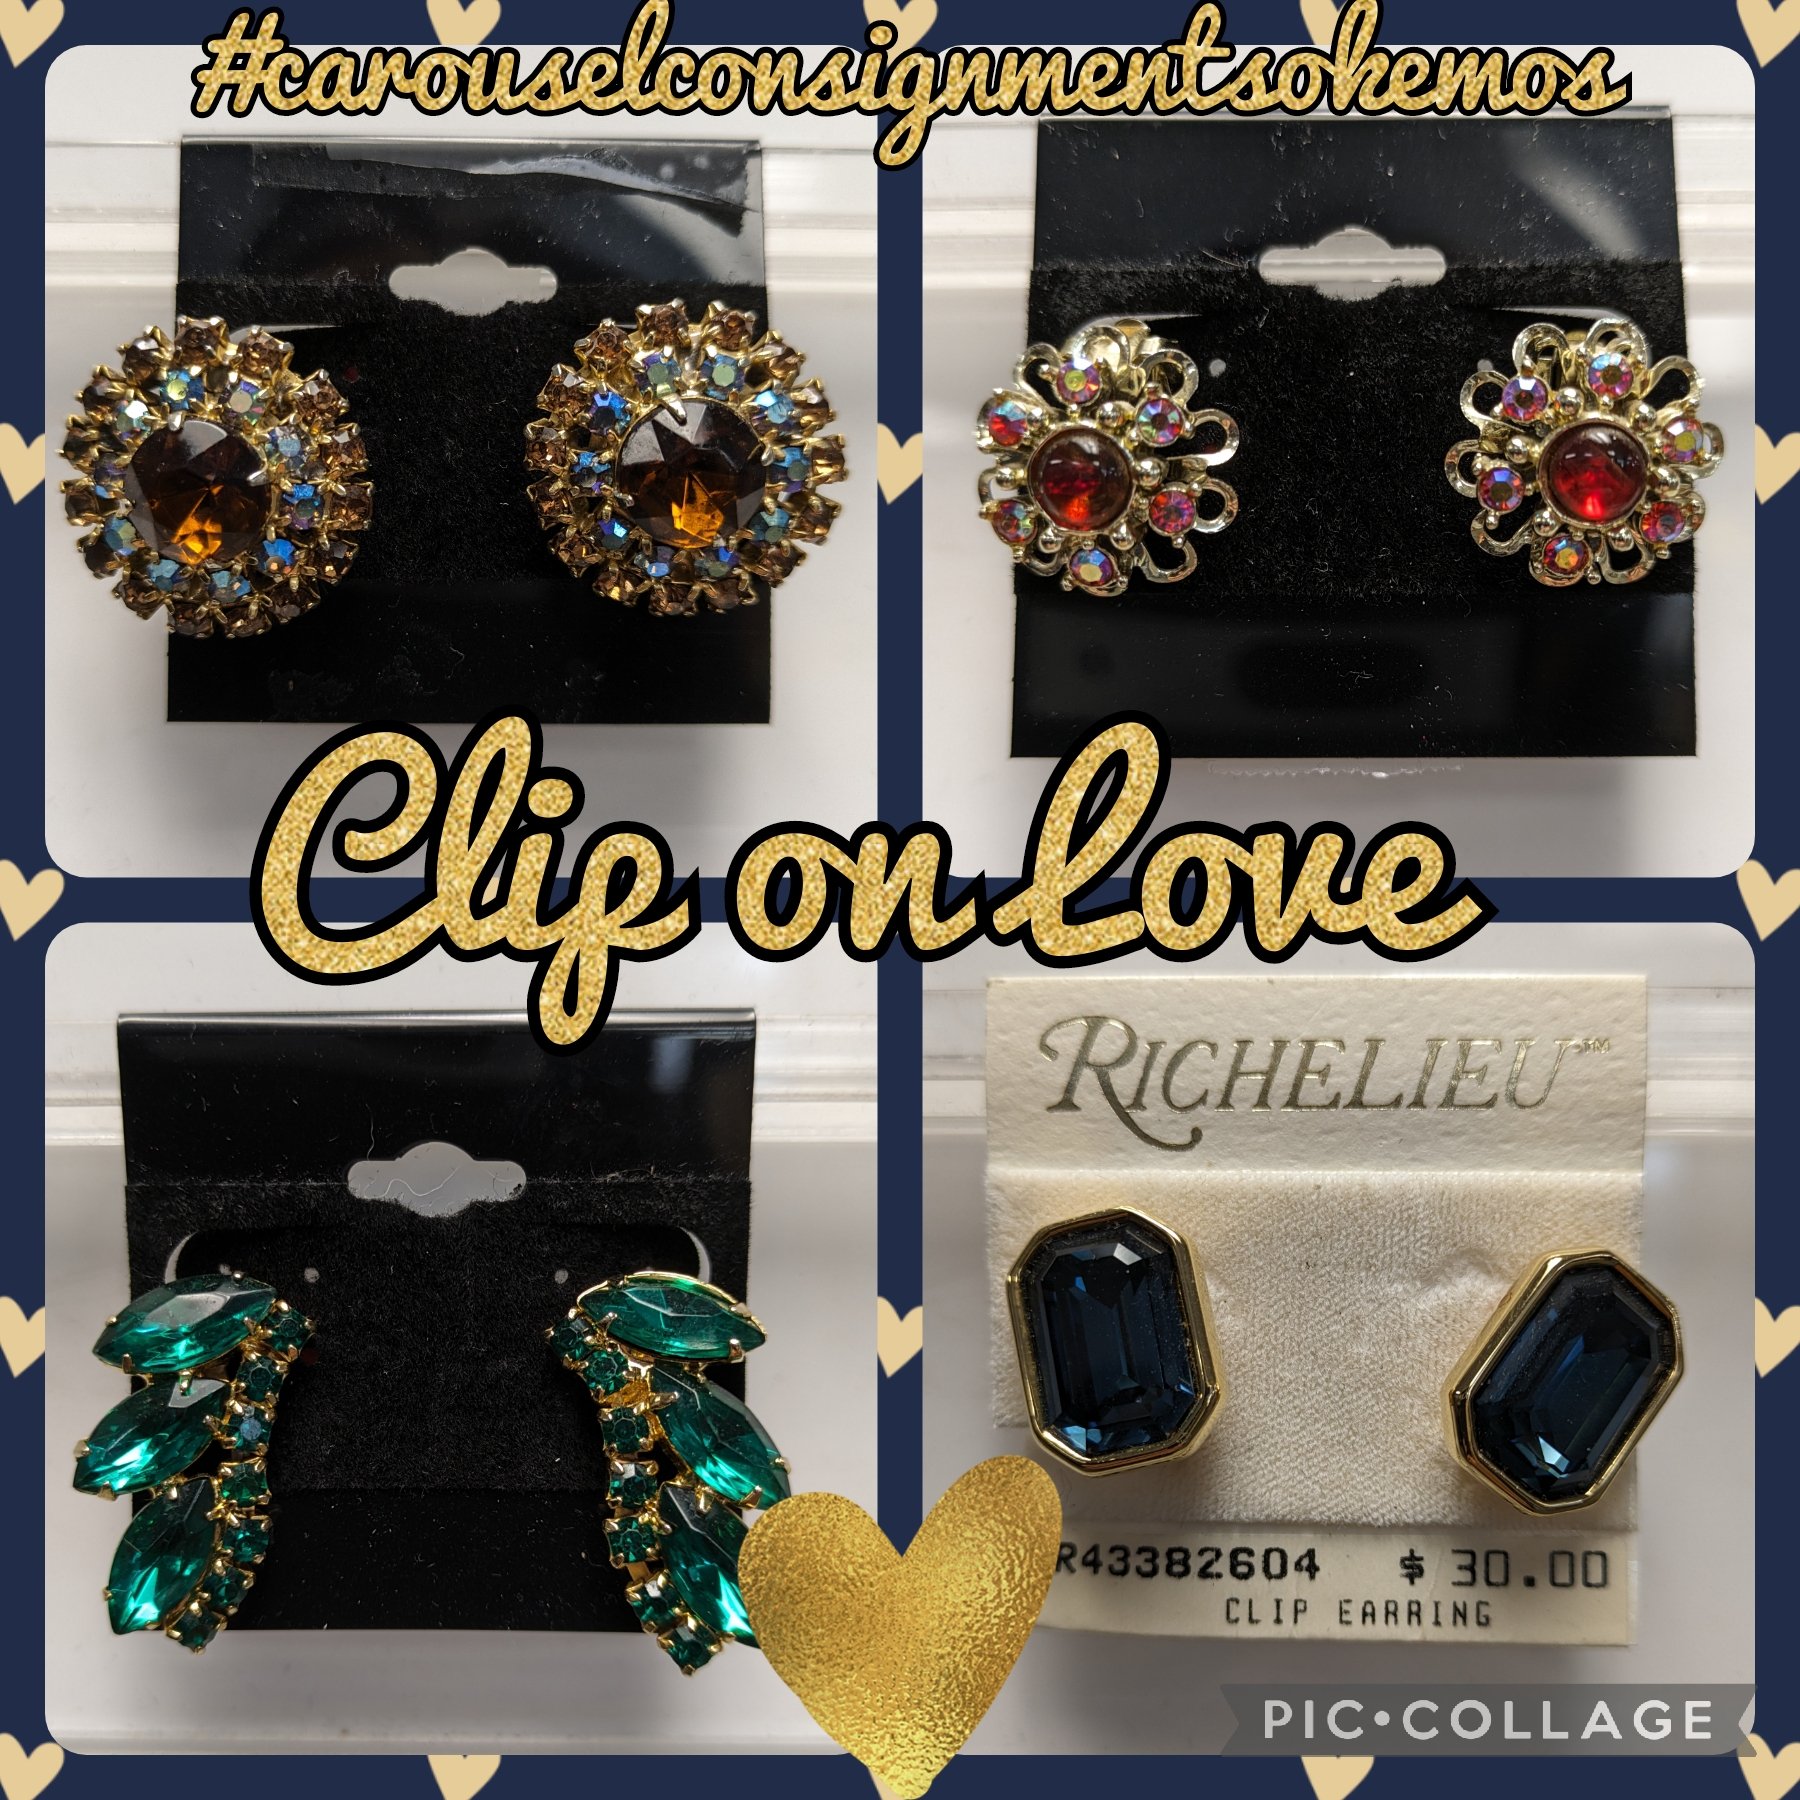 ✨Clip On Love✨
Clip on earrings priced from $5-$8.
#carouselconsignmentsokemos #shoplocal #shopsmall #shopsmallbusiness #resalenotretail #shopconsignment #shopsecondhand #prelovedclothing #okemos #sustainablefashion #accessorize #clipon #earrings #oo